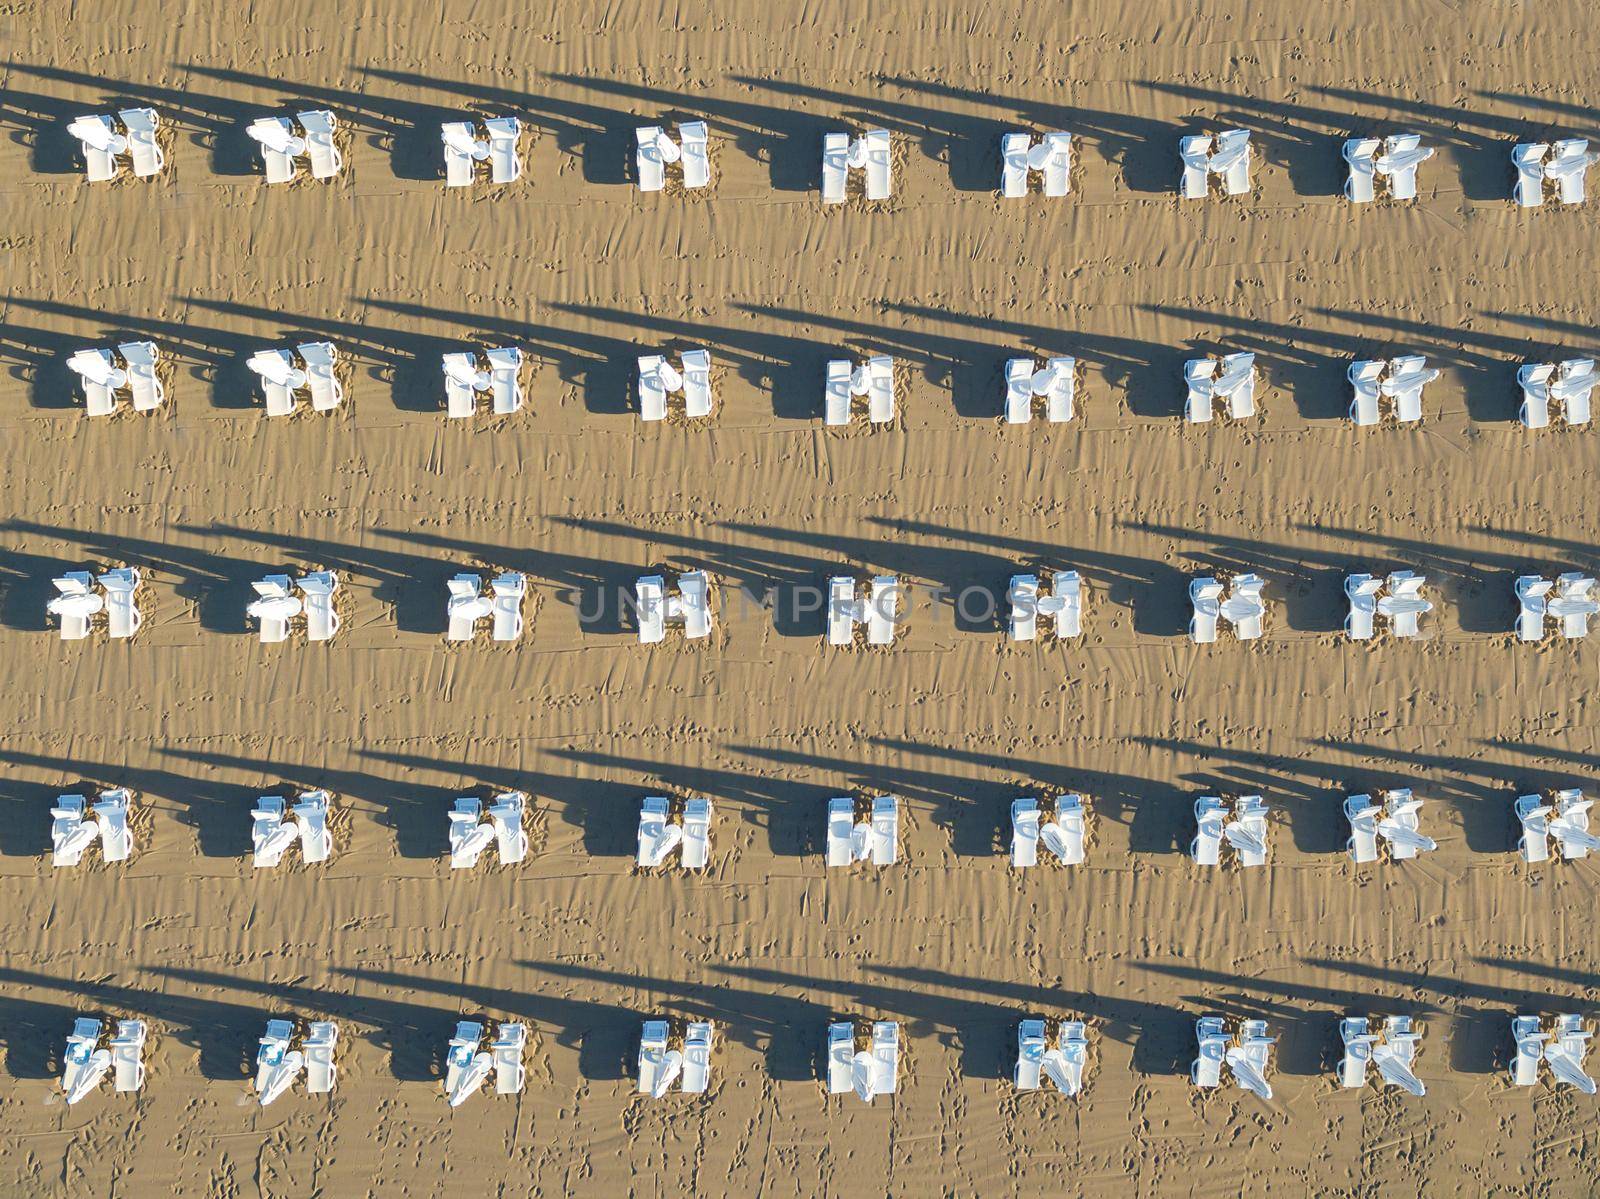 Sunbeds and umbrellas lined up on the beach at sunrise